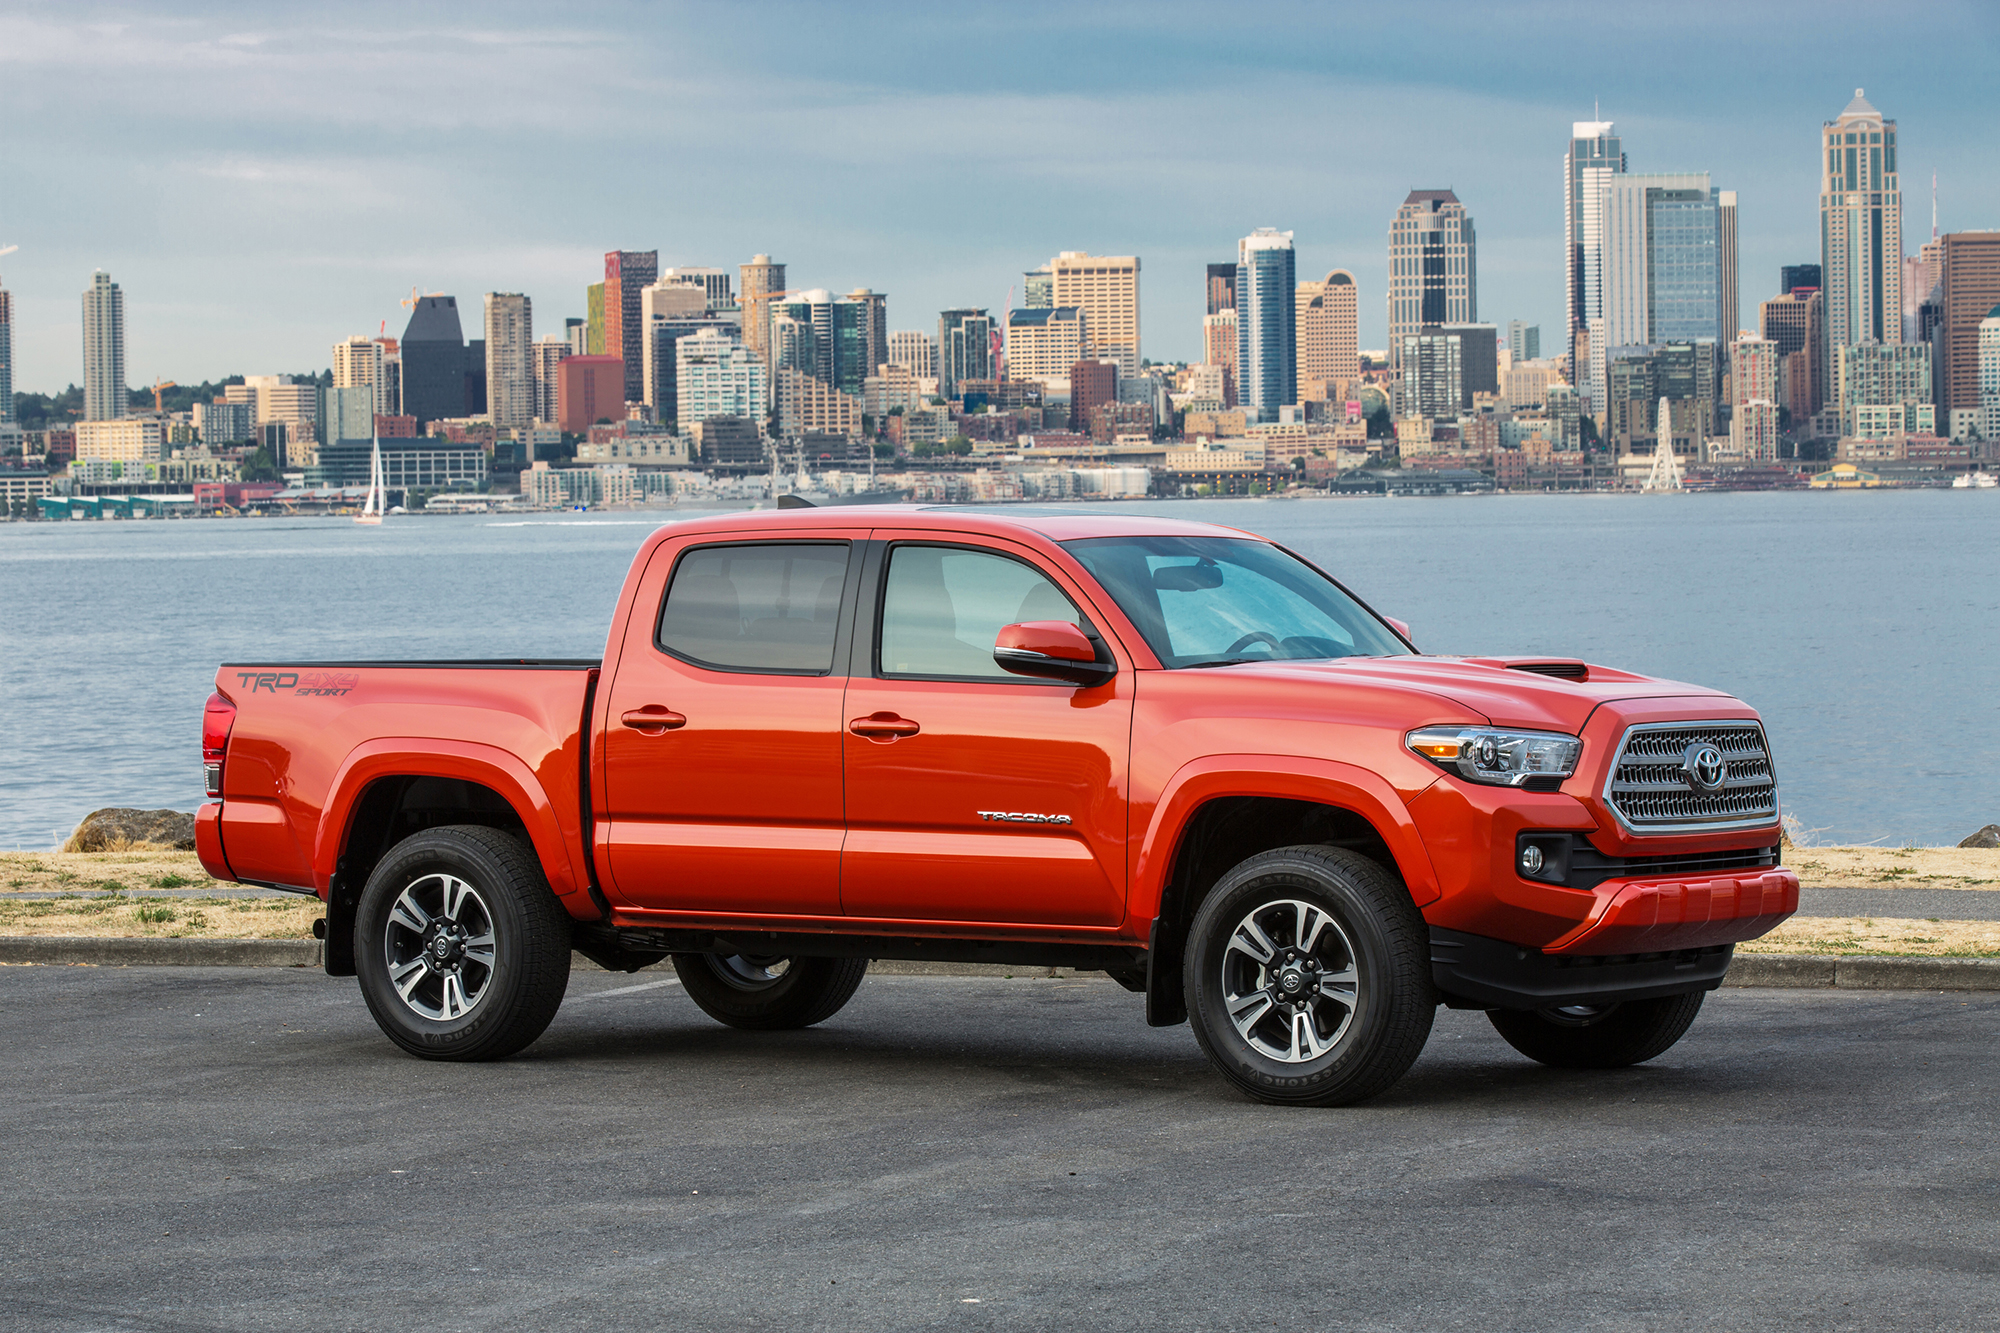 52 Best Images Toyota Tacoma Sport 4X4 / 2014 Toyota Tacoma 4x4 TRD Sport For Sale | Tacoma World